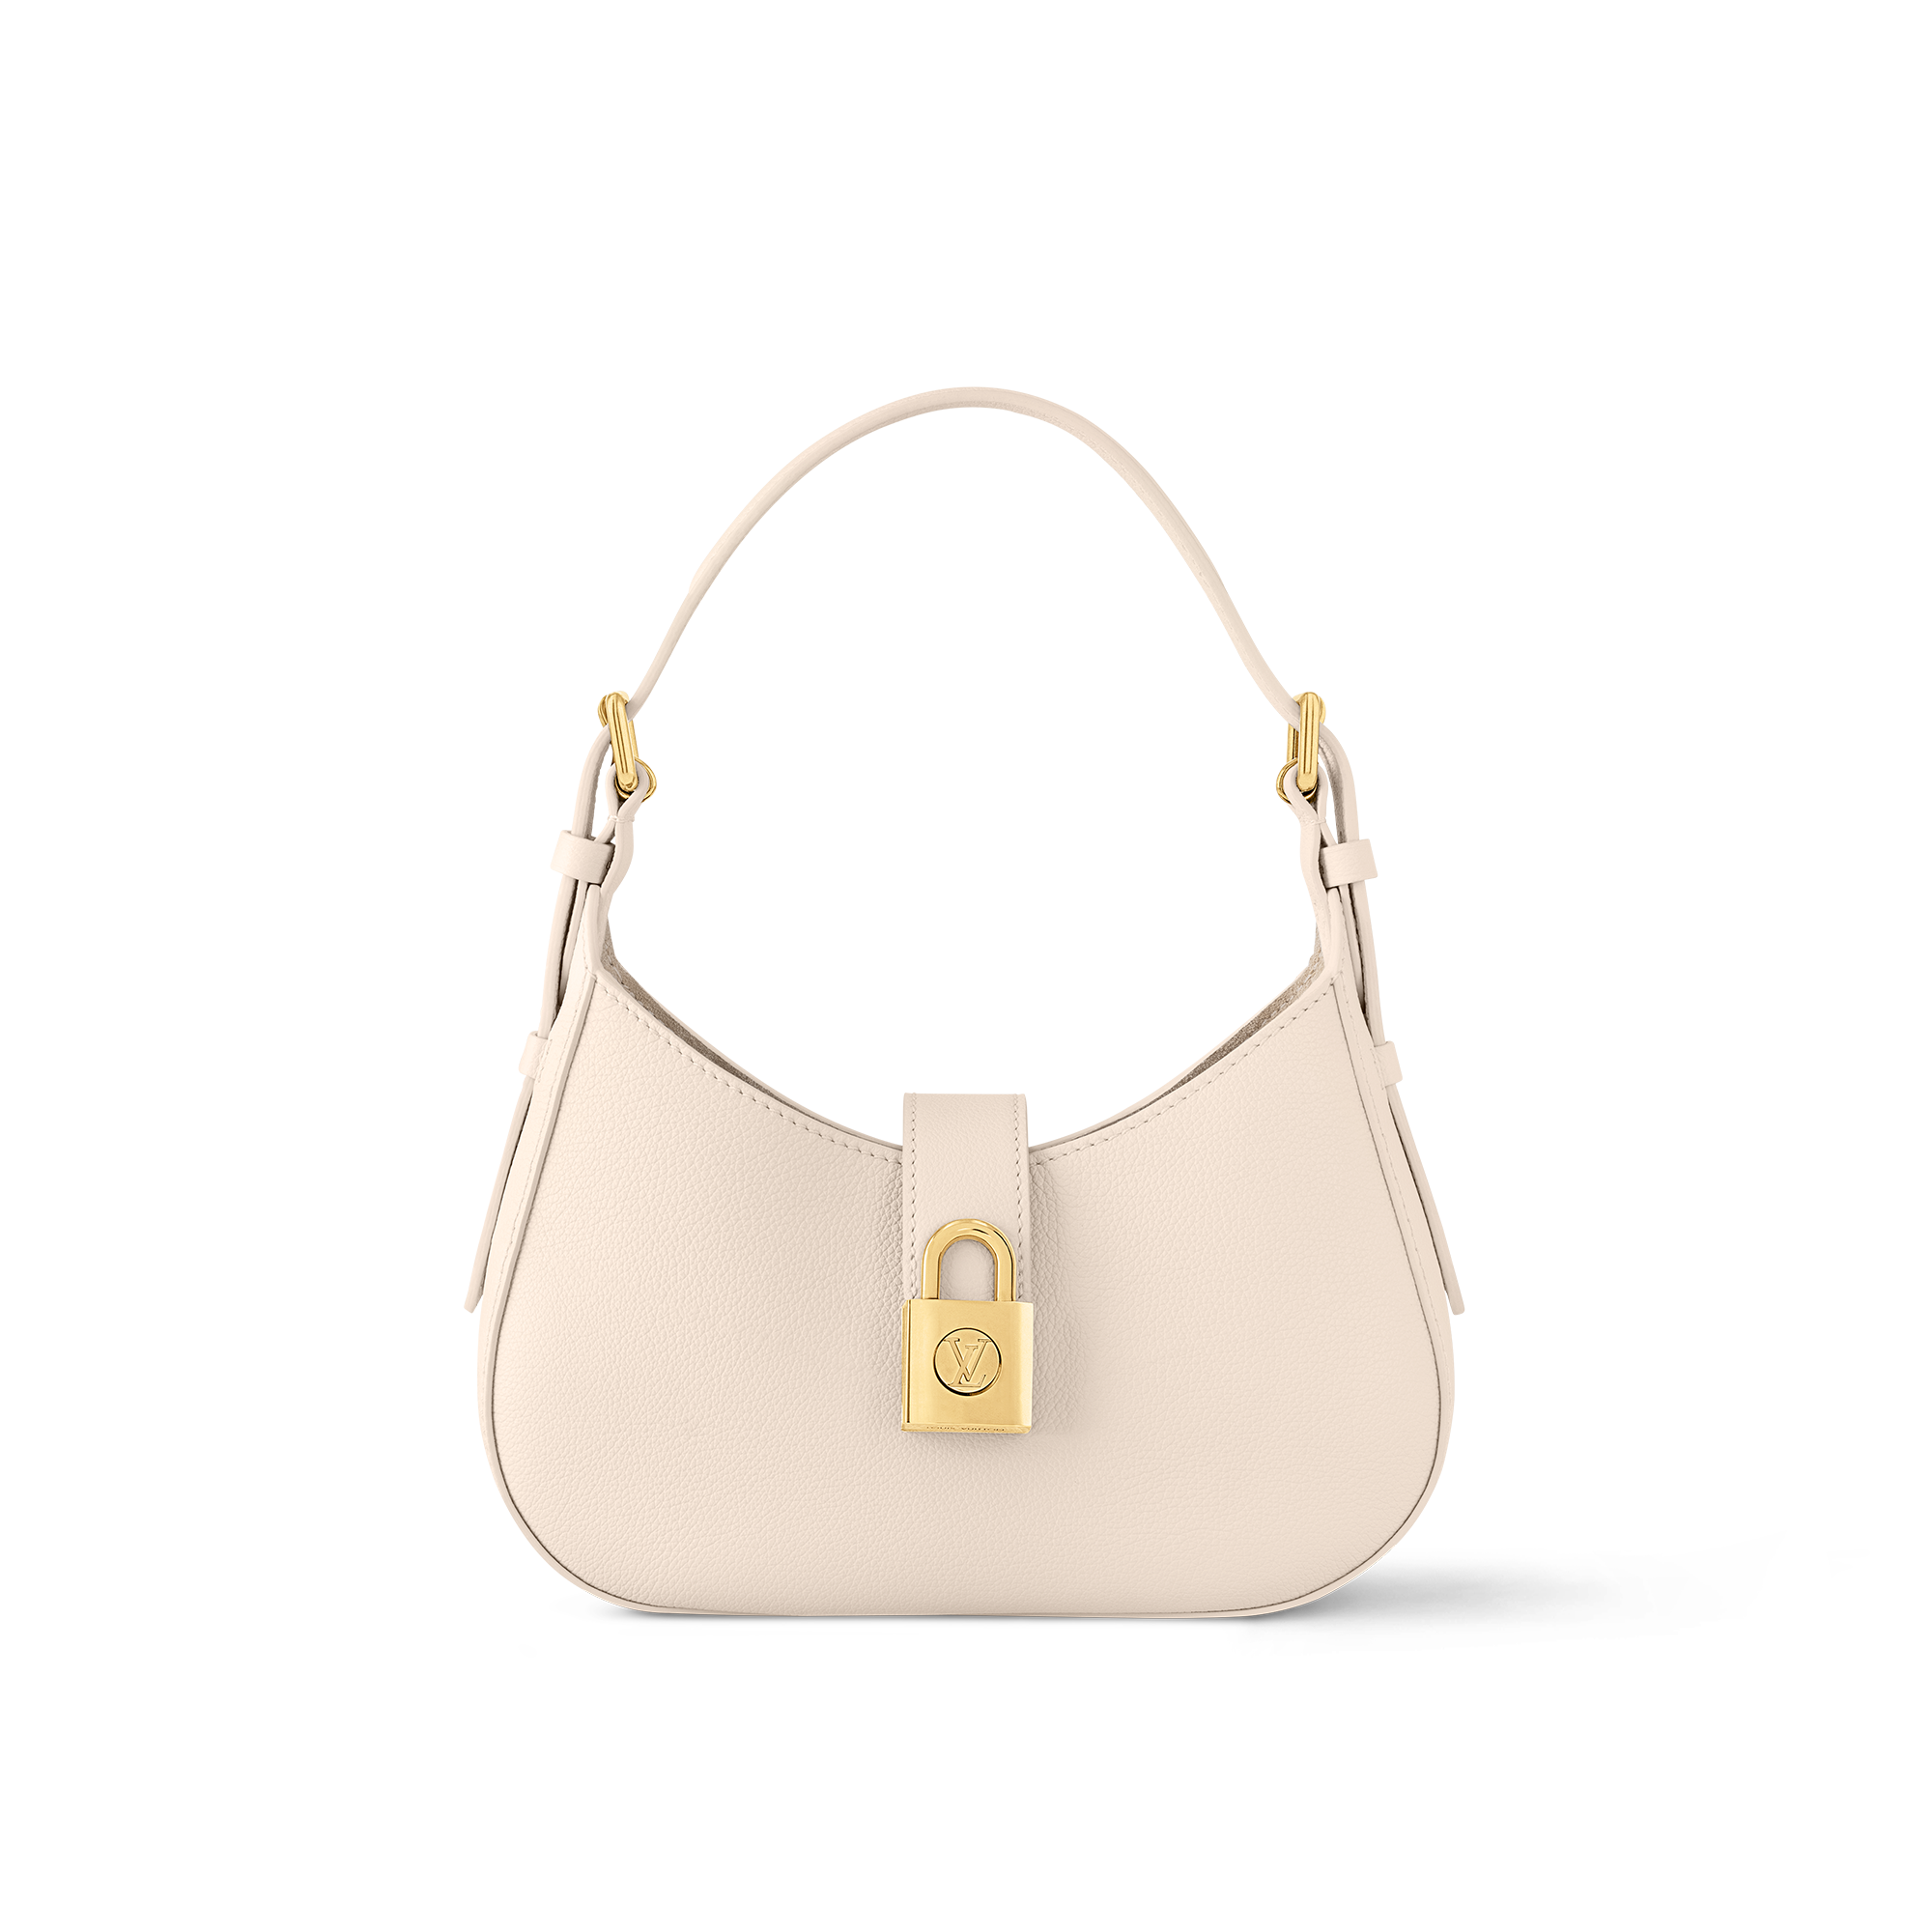 Louis Vuitton shoulder bag in white with a gold lock detail